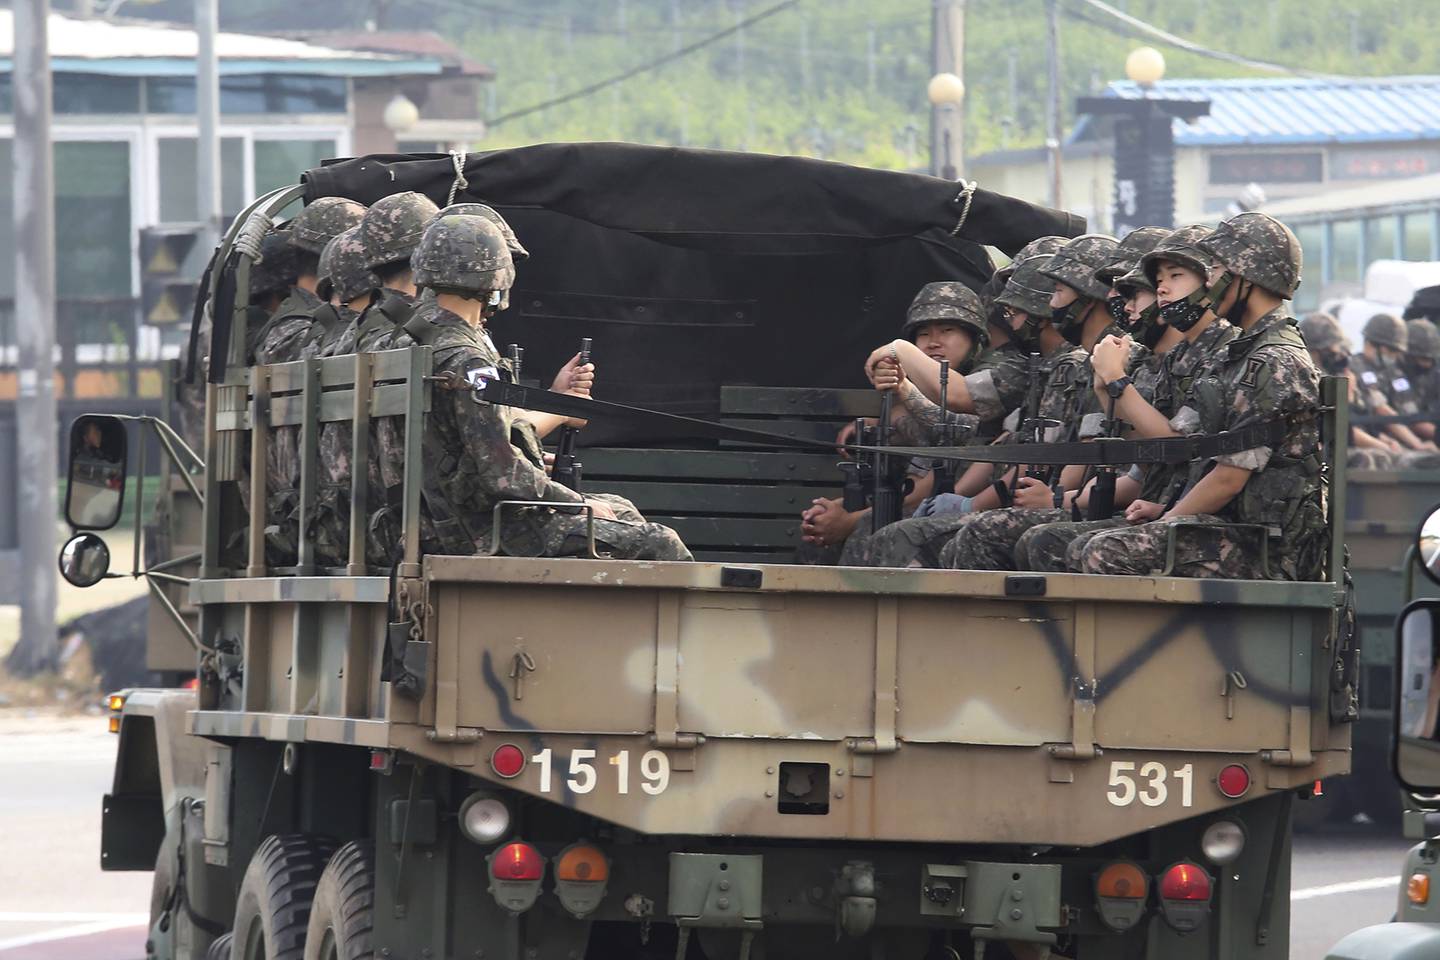 South Korean army soldiers ride on the back of a truck in Paju, near the border with North Korea, South Korea, Wednesday, June 17, 2020.